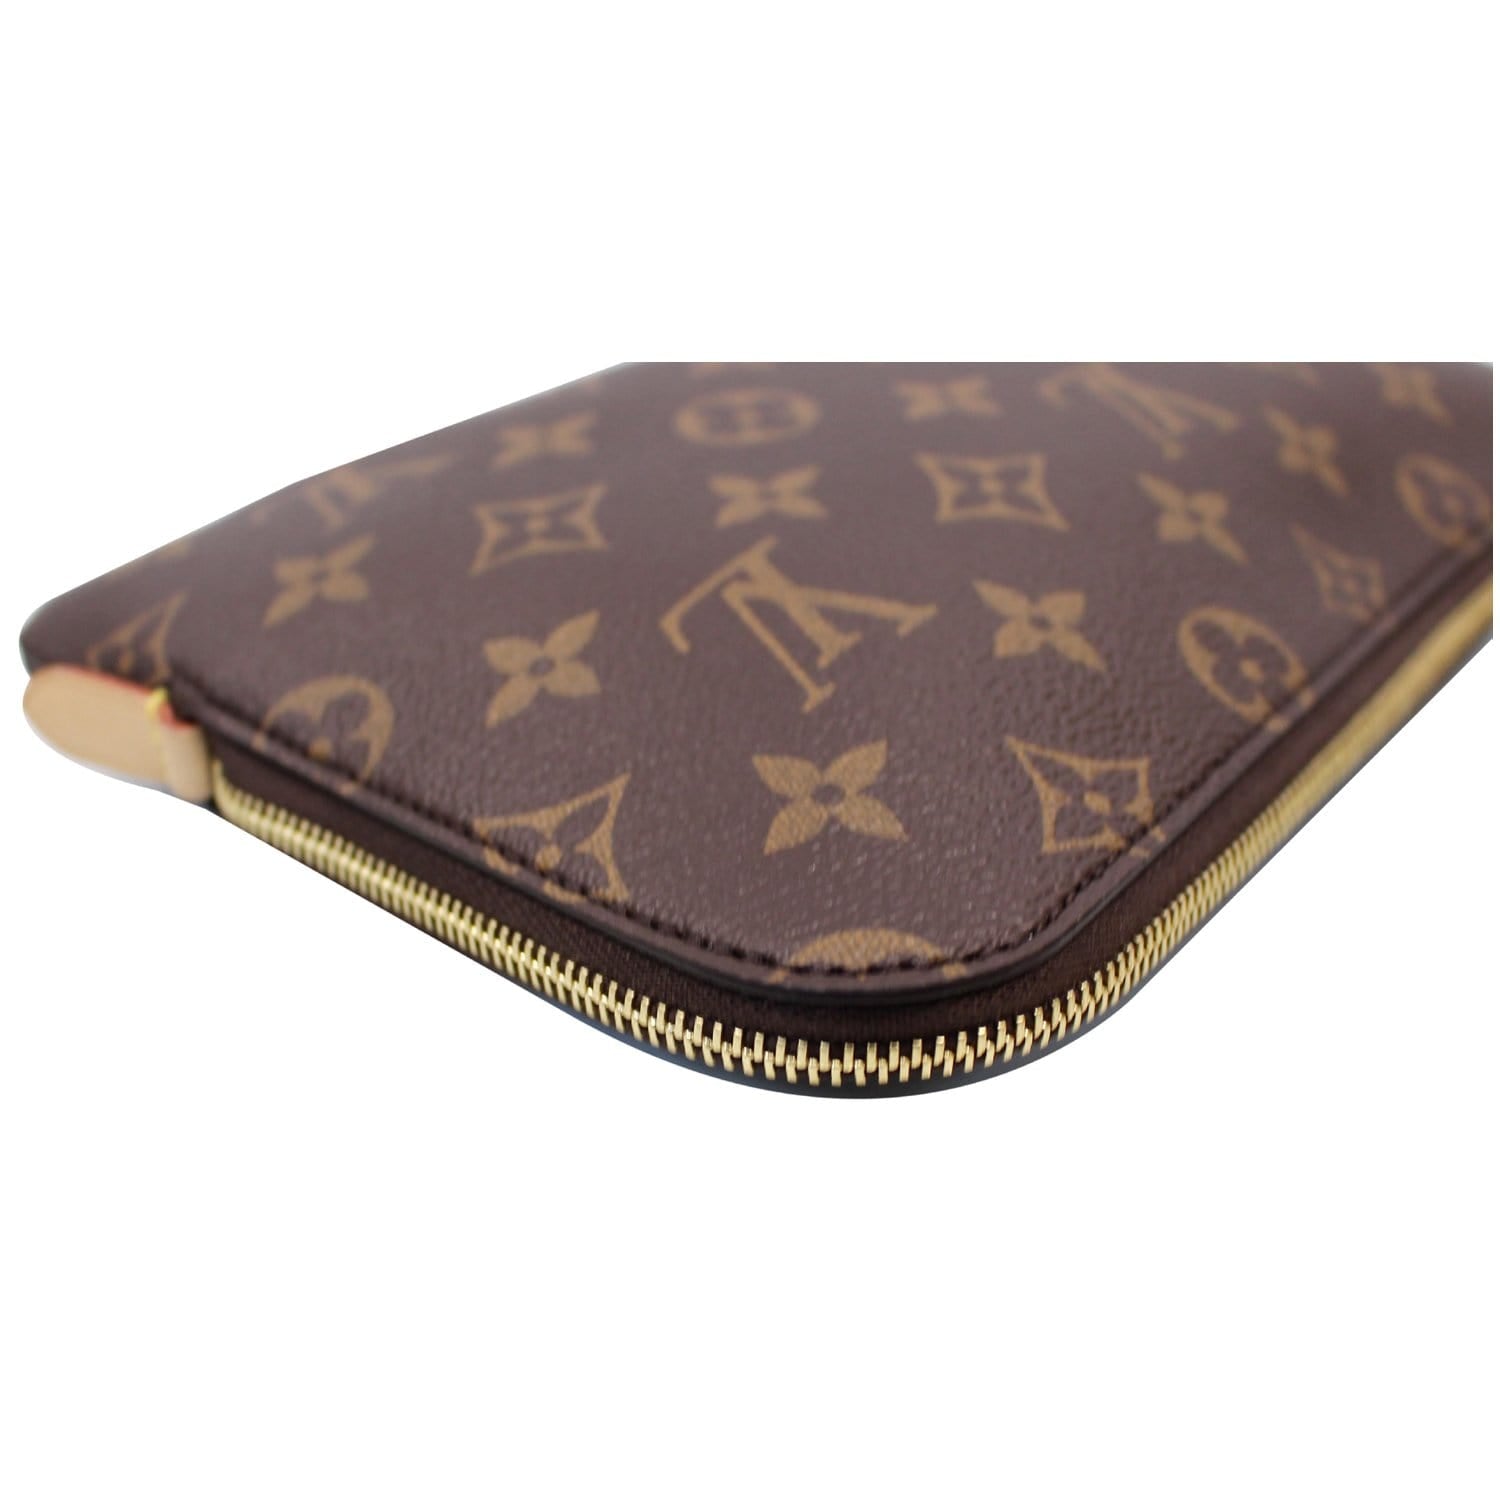 Louis Vuitton Monogram Etui Voyage PM Pouch - Brown Luggage and